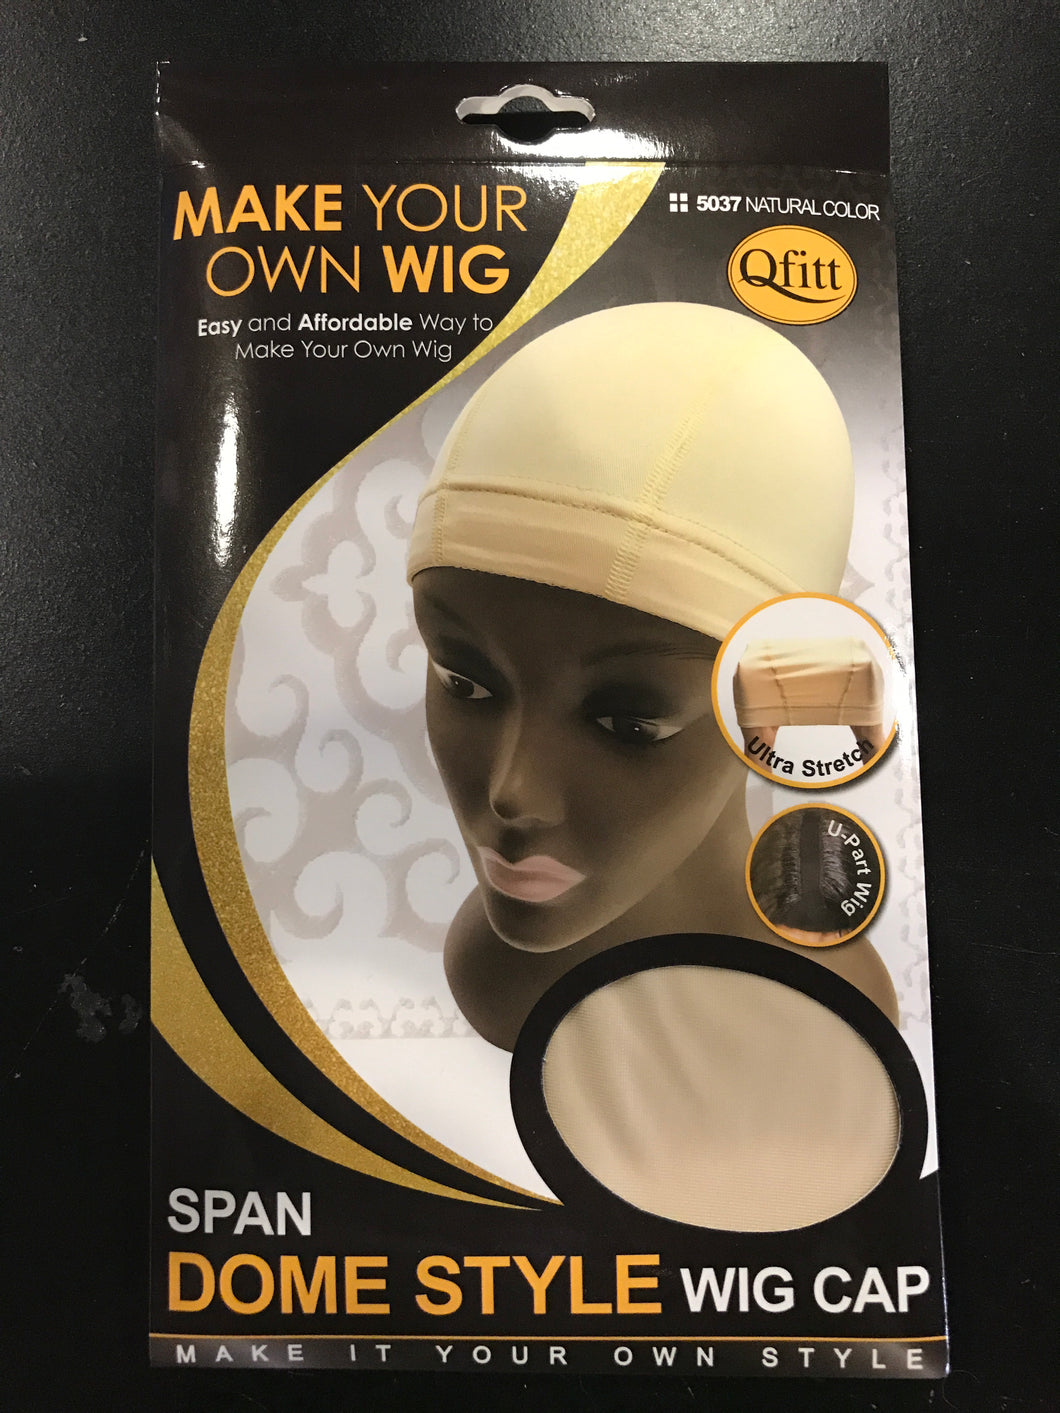 Qfitt make your own wig